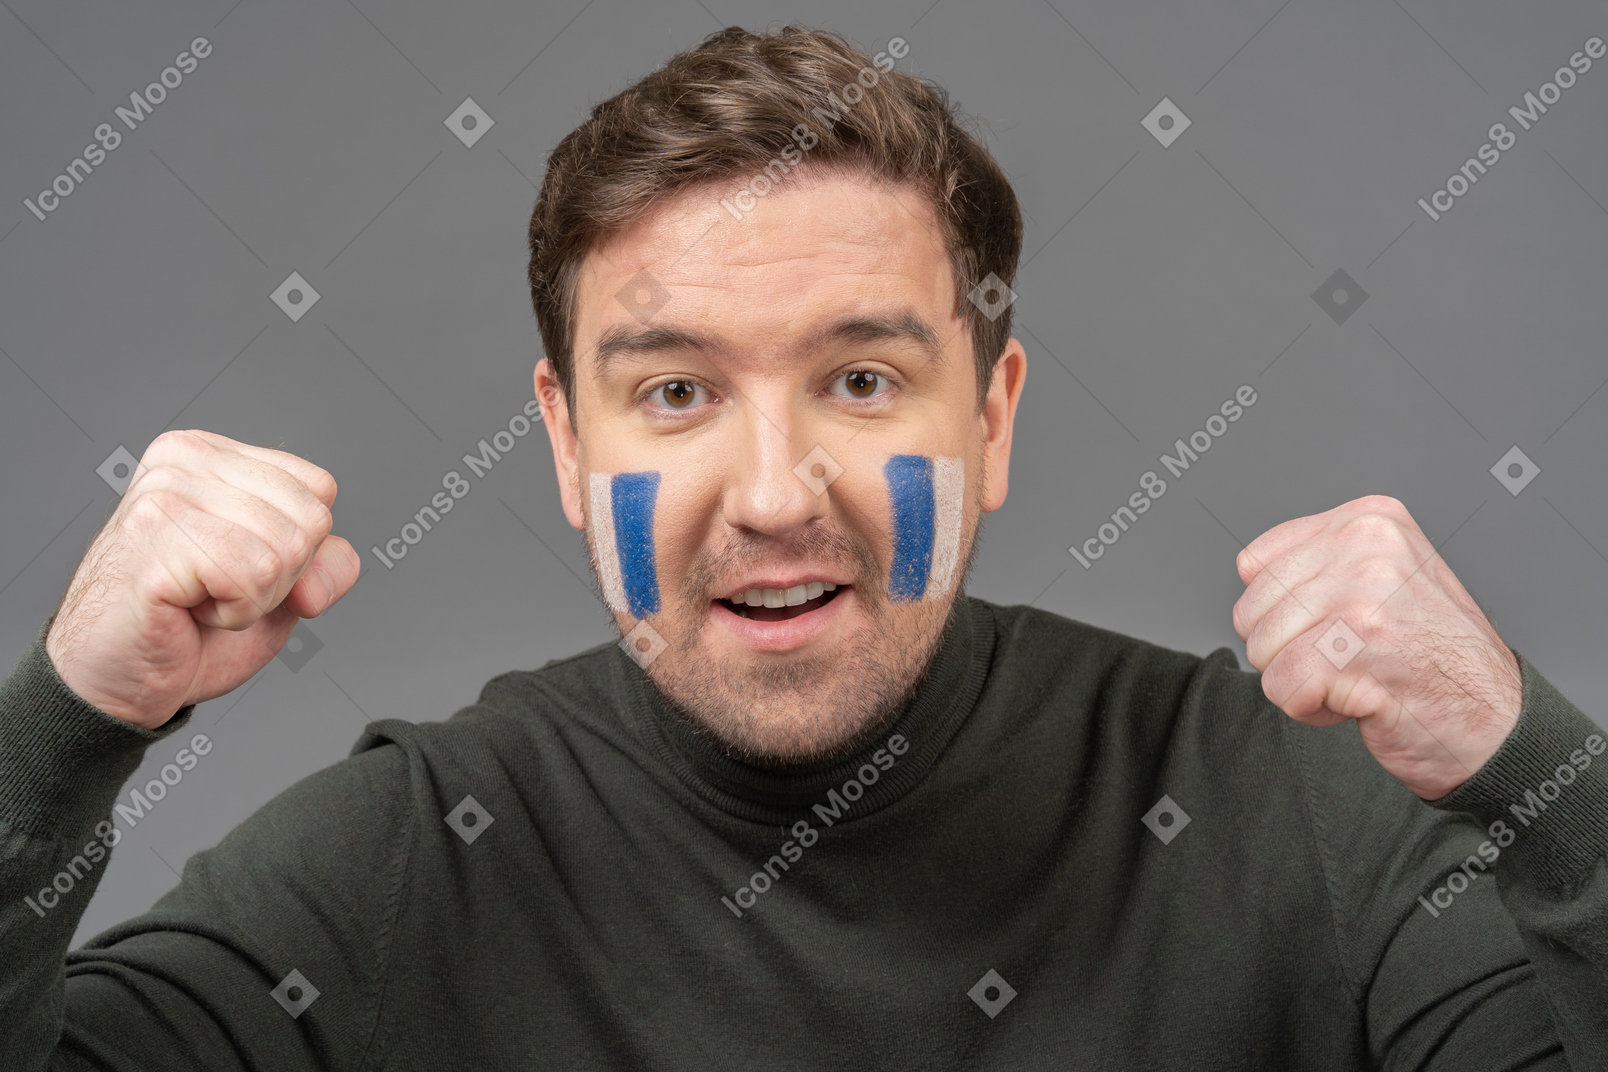 Front view of a male football fan with blue & white face art clenching fist